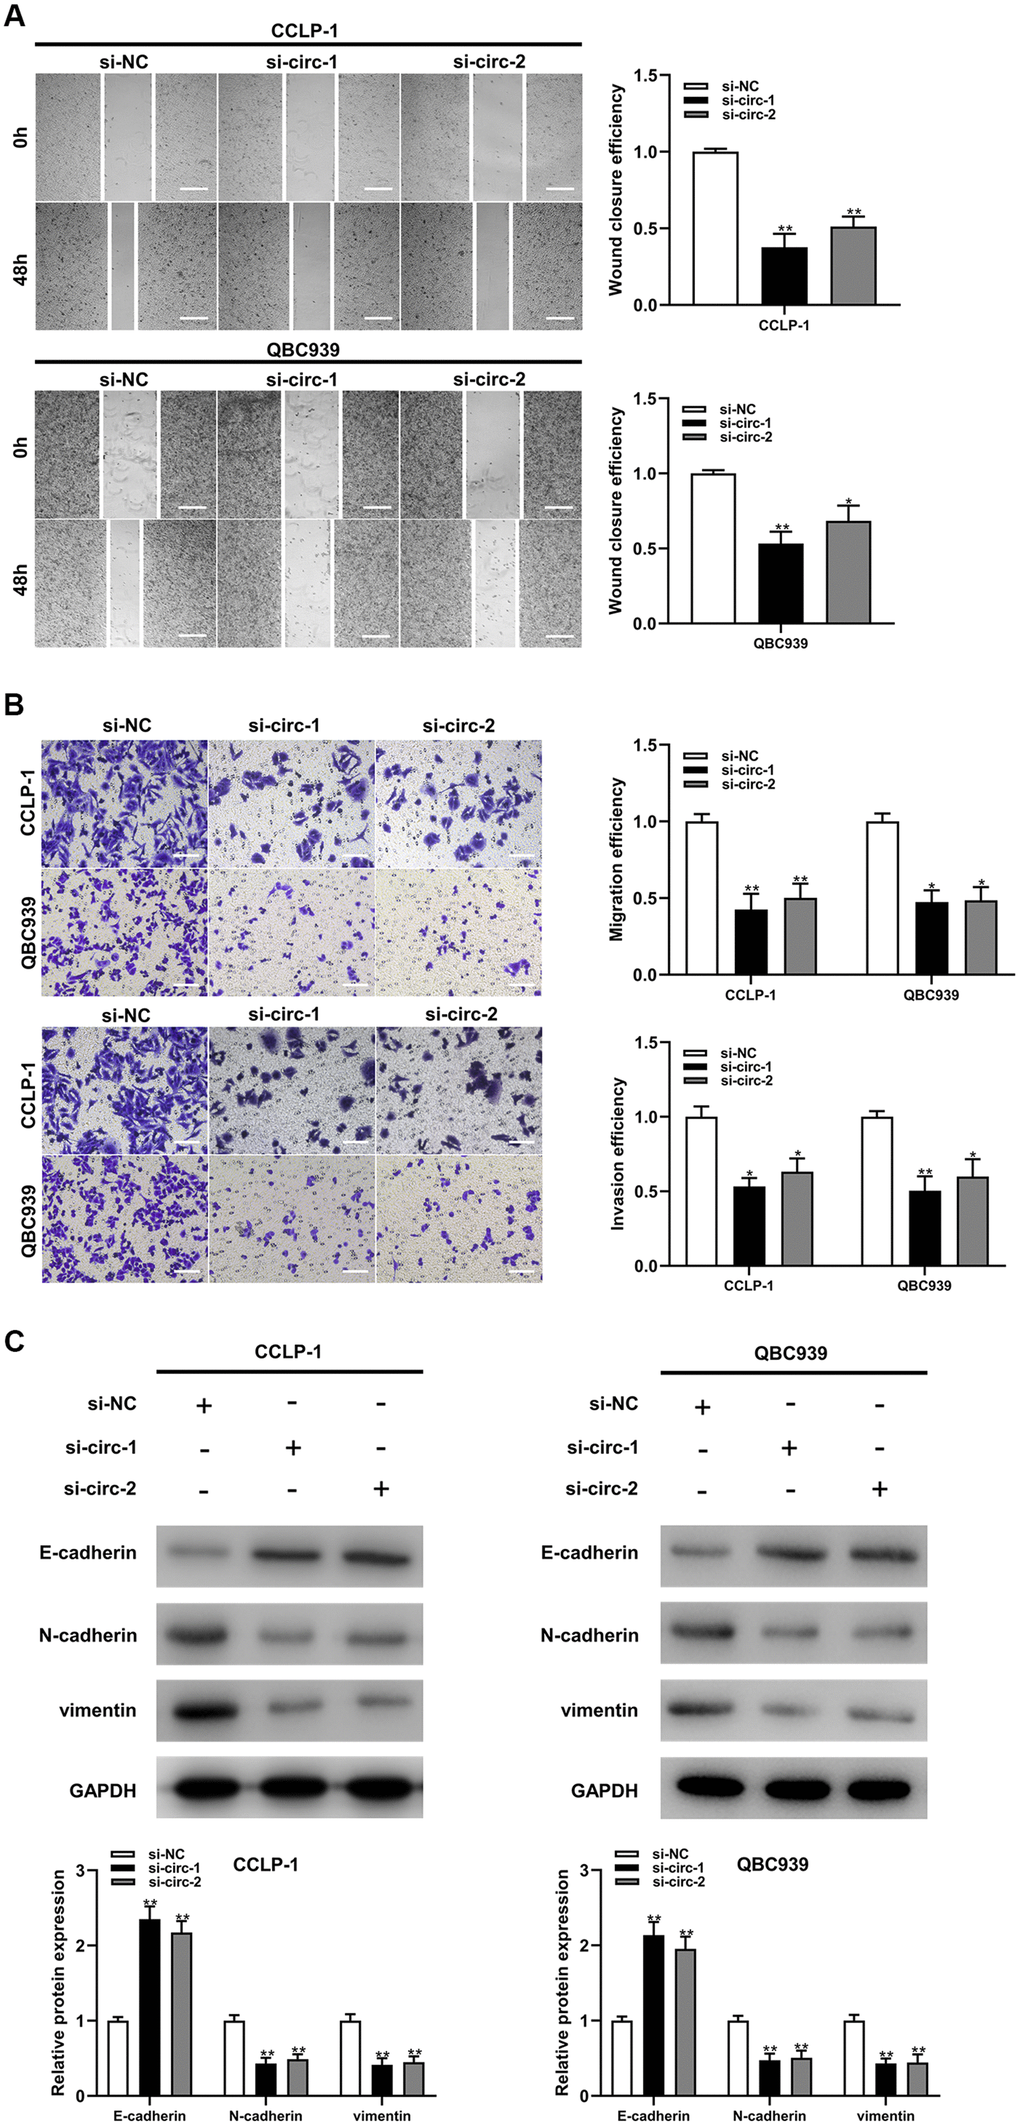 Silencing circ-ZNF609 inhibited cholangiocarcinoma cells migration and invasion. (A) Wound healing assay was used to detect the migration ability of CCA cells after circ-ZNF609 knockdown. (B) The migration and invasive abilities of CCLP-1 and QBC939 were confirmed by transwell assay after silencing circ-ZNF609. (C) Western blot was used to detect EMT-related proteins including E-cadherin, N-cadherin and vimentin. **PP